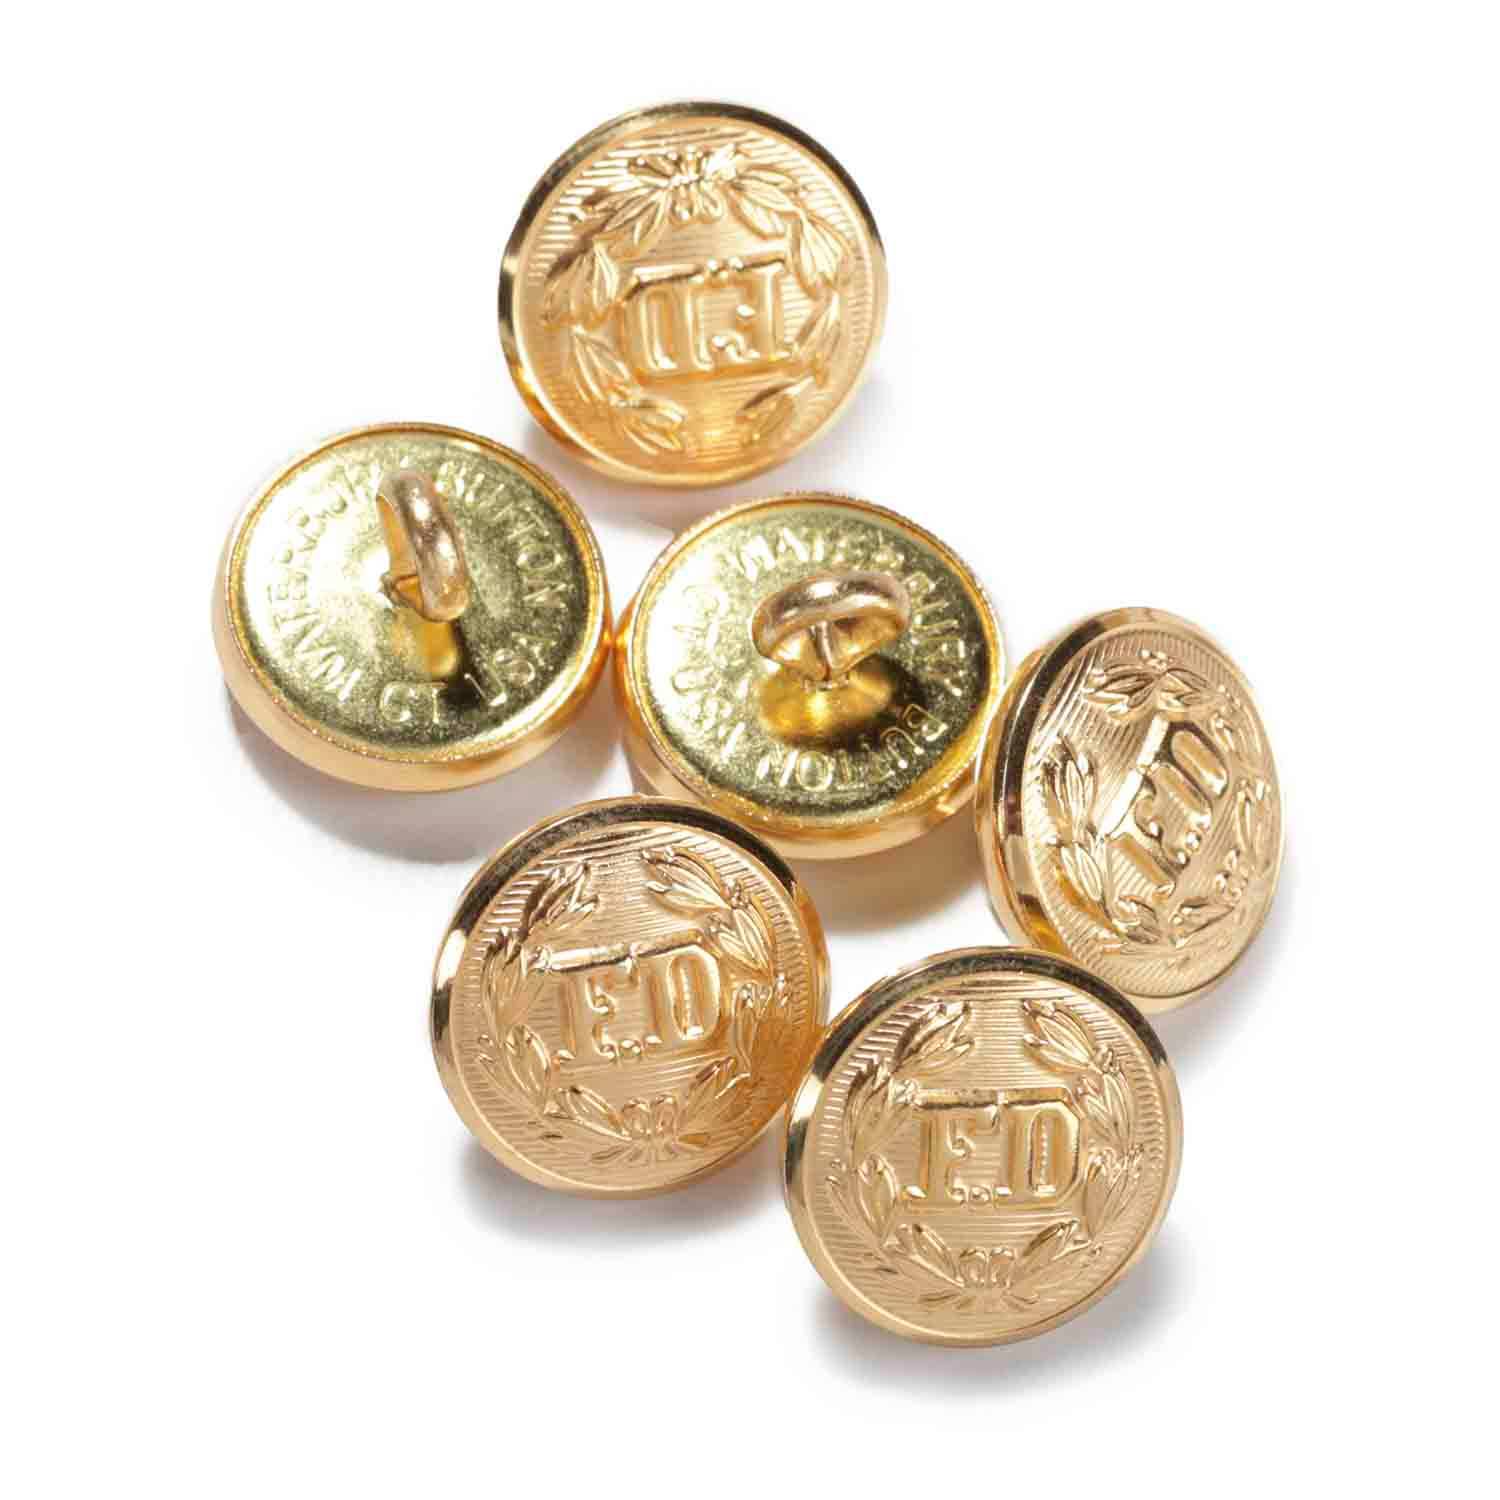 Waterbury 'F.D.' Buttons (6 pack)